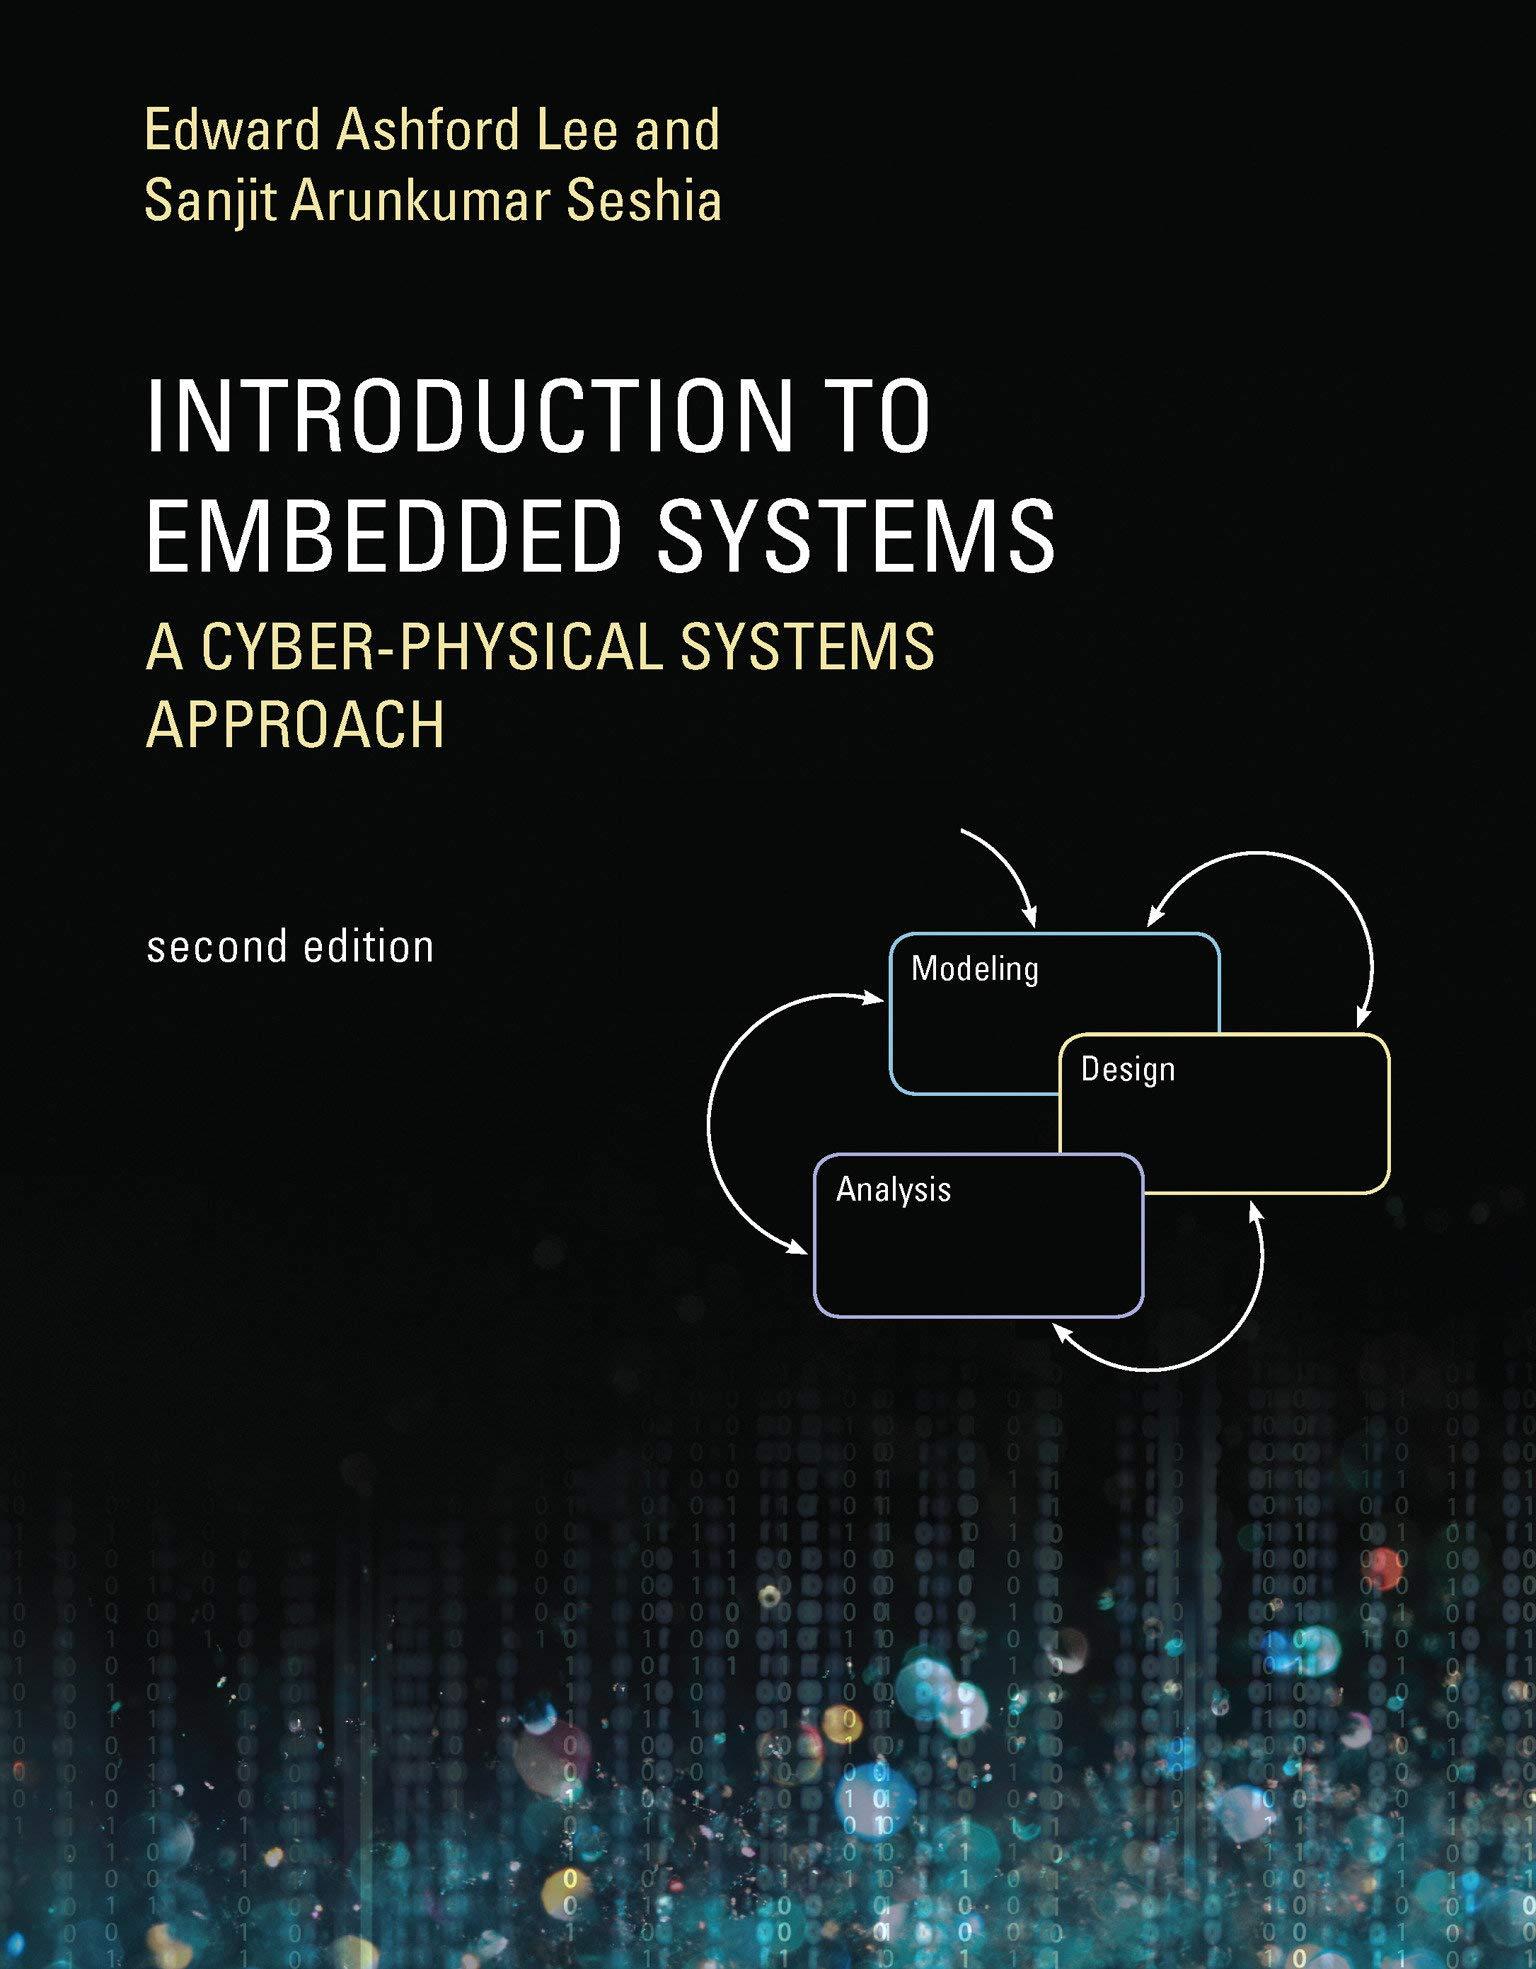 introduction to embedded systems a cyber physical systems approach 2nd edition edward ashford lee, sanjit